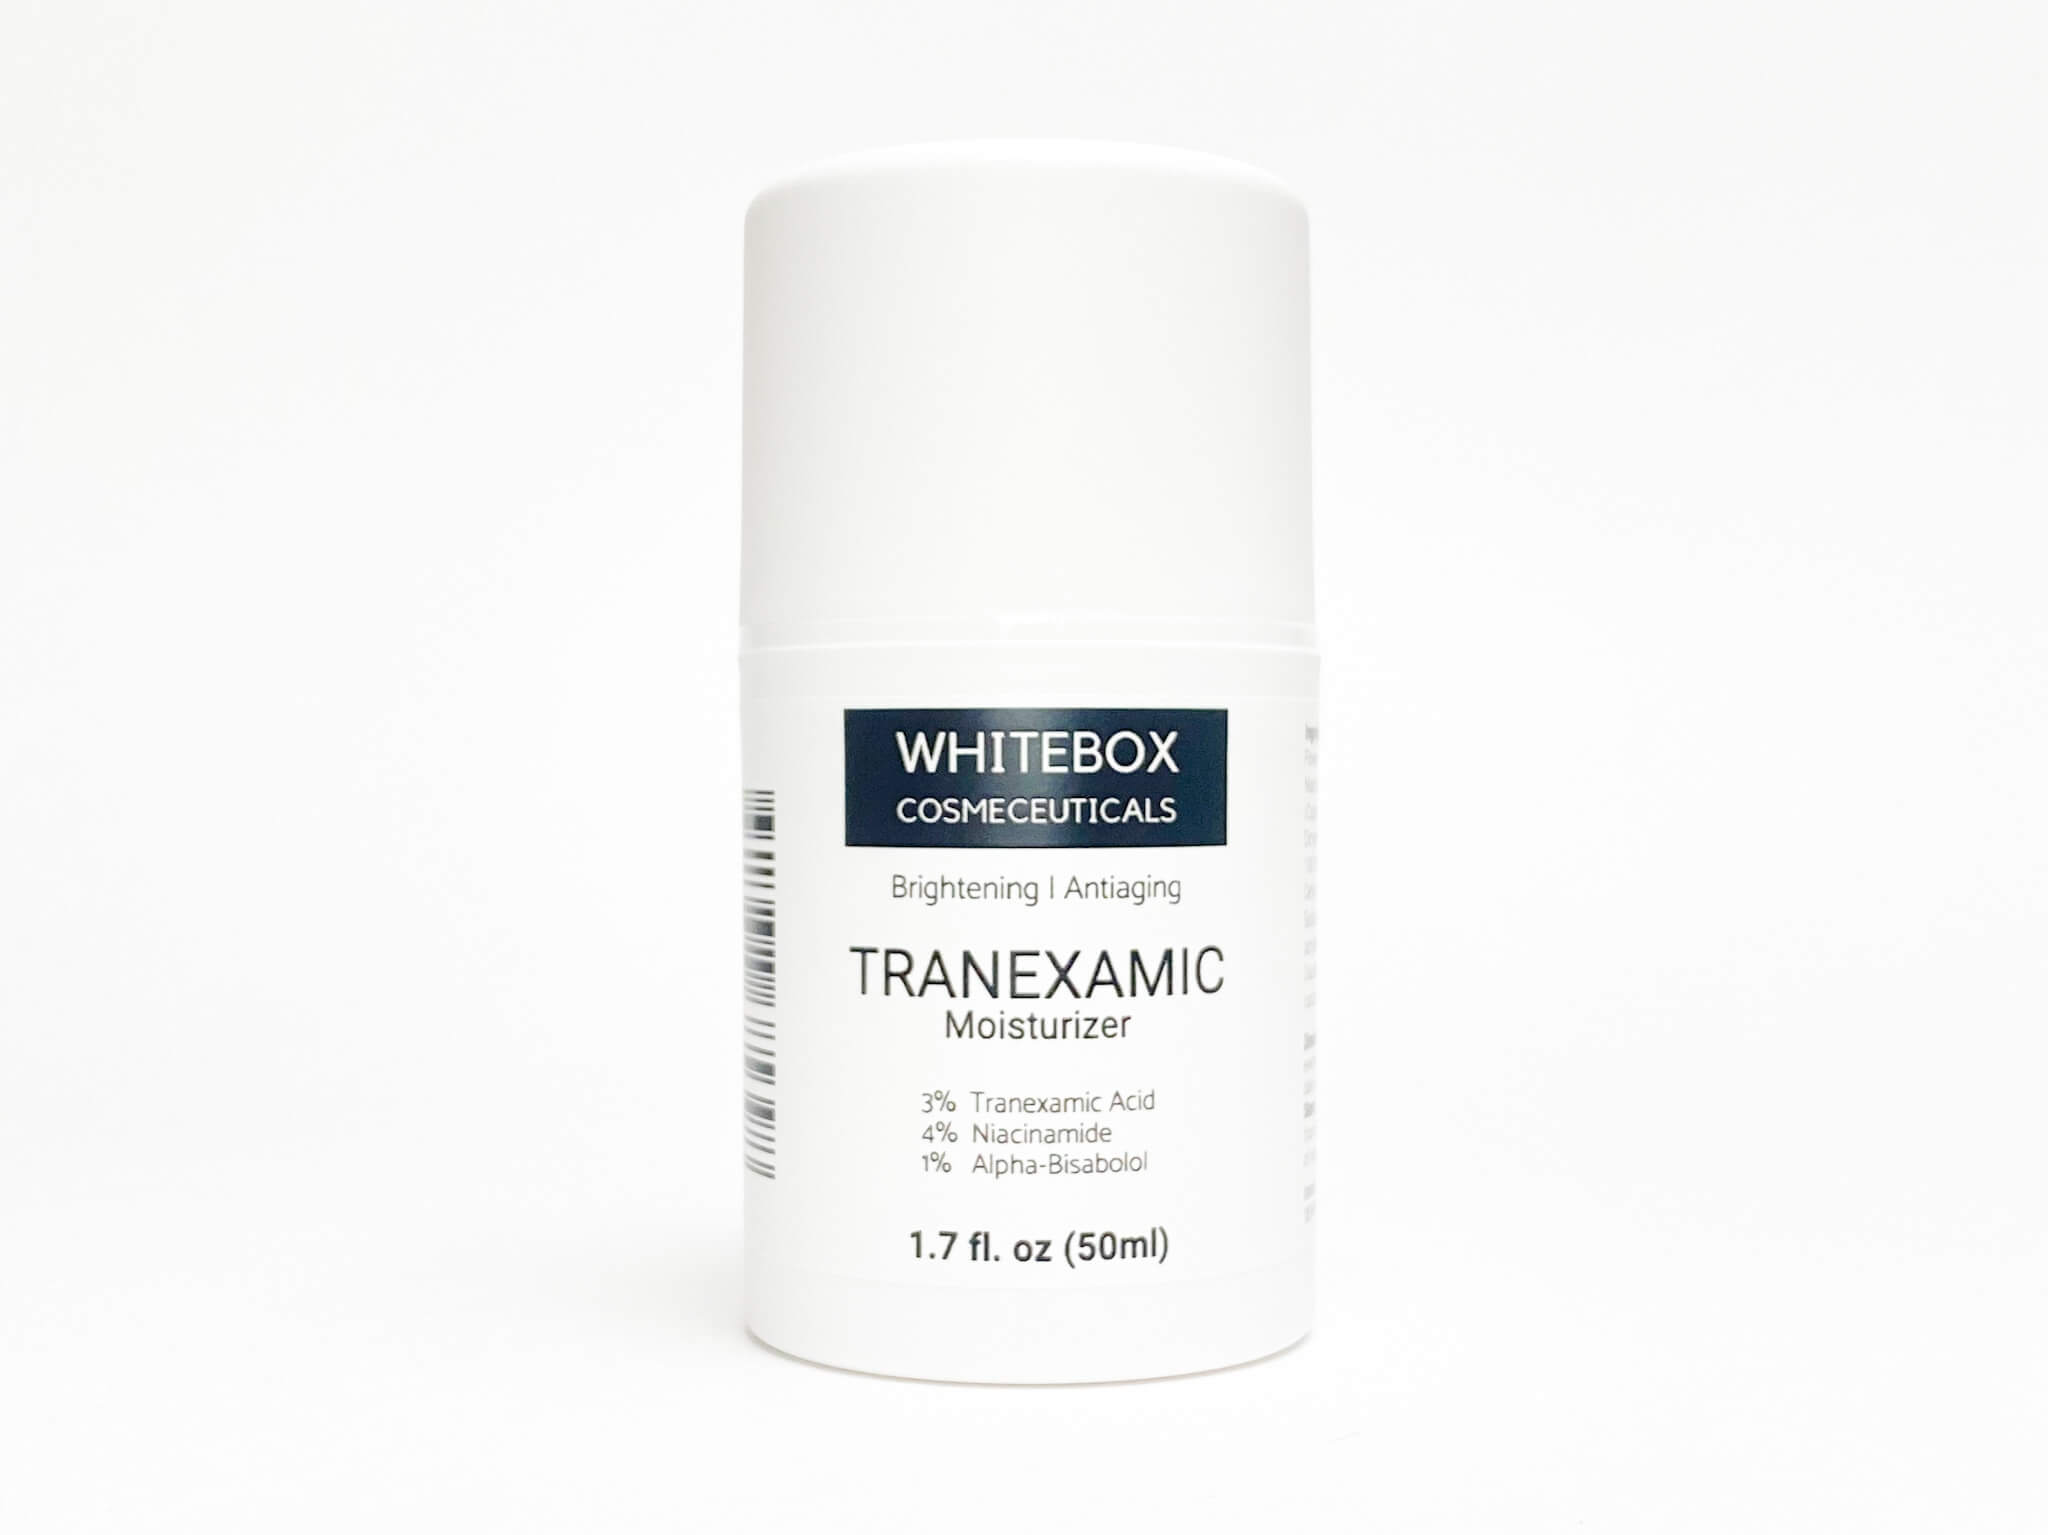 15-facts-about-tranexamic-acid-moisturizer